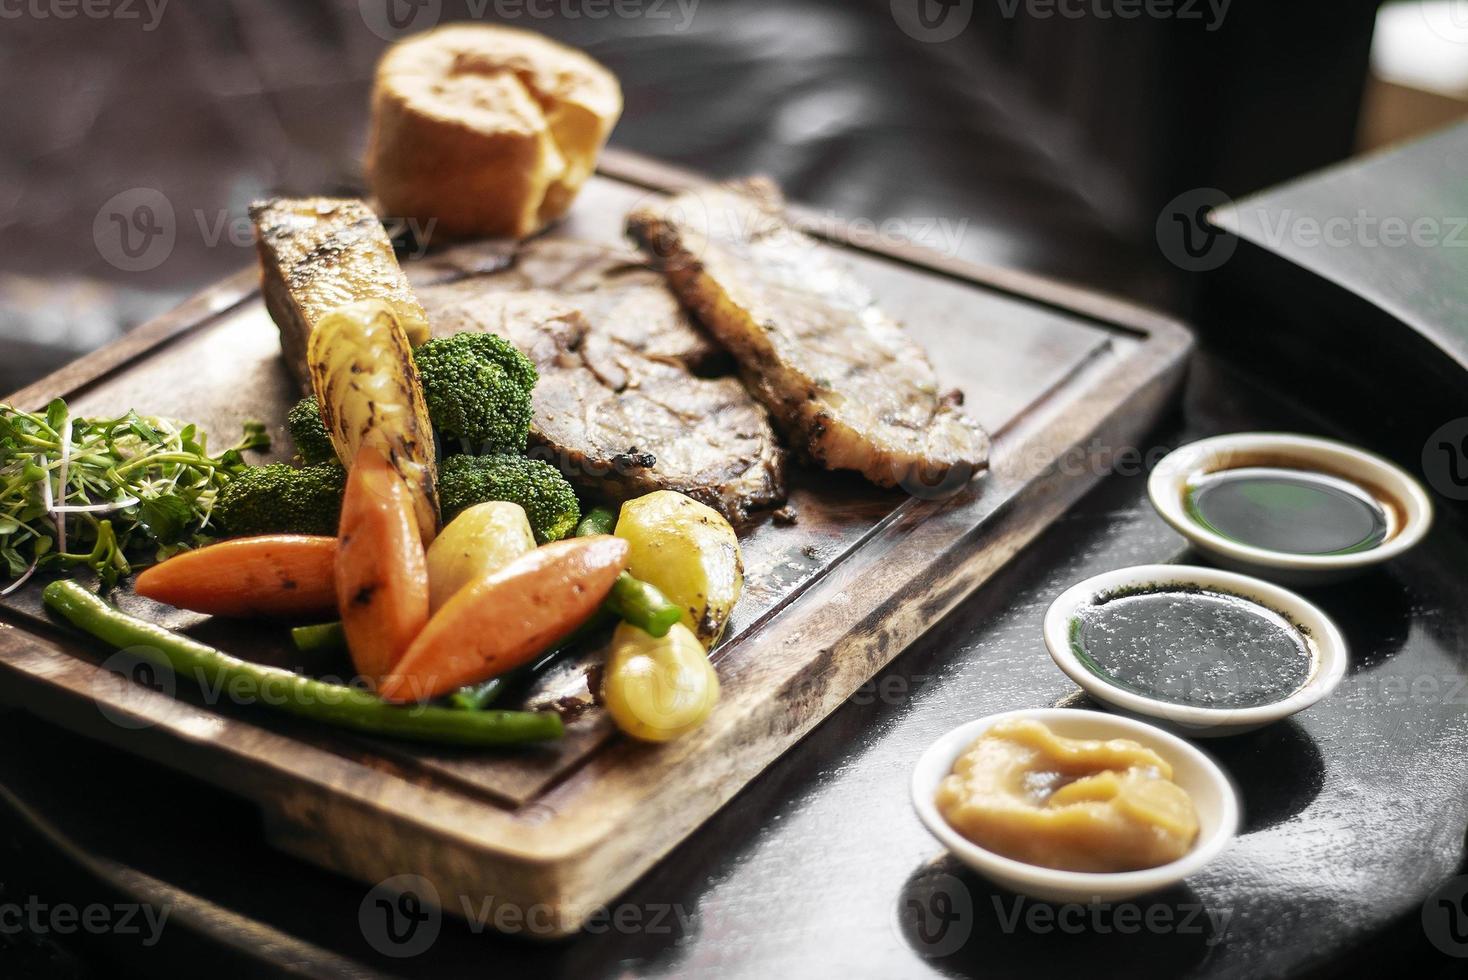 Gourmet Sunday roast beef traditional British meal set on old wooden pub table photo